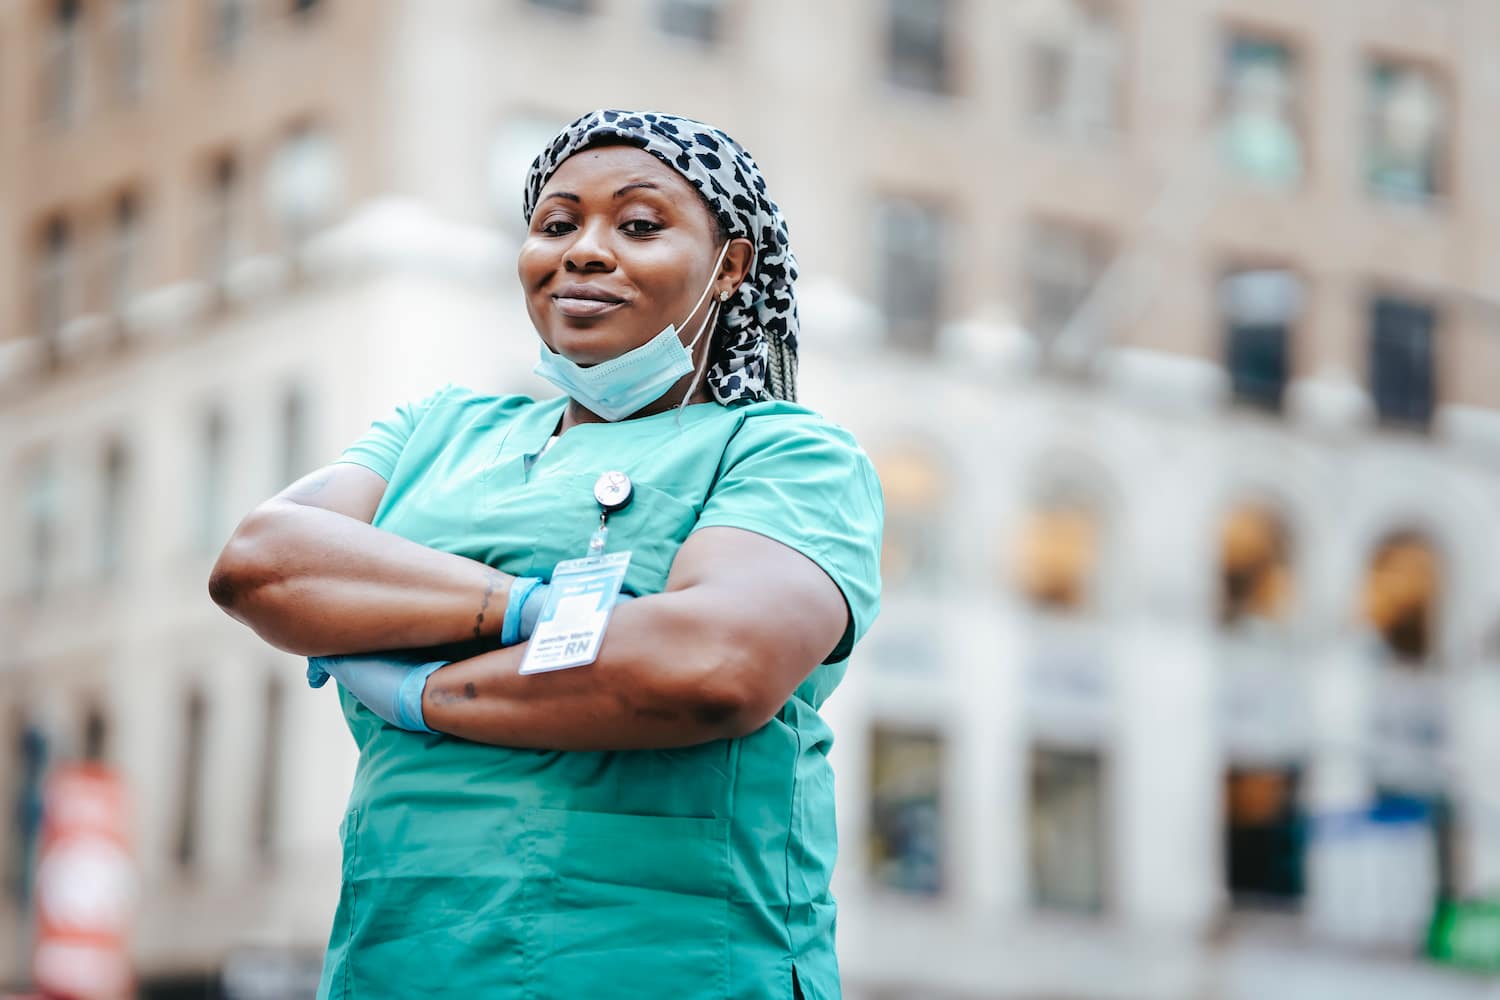  A nurse who works as an hourly employee stands in front of a hospital.